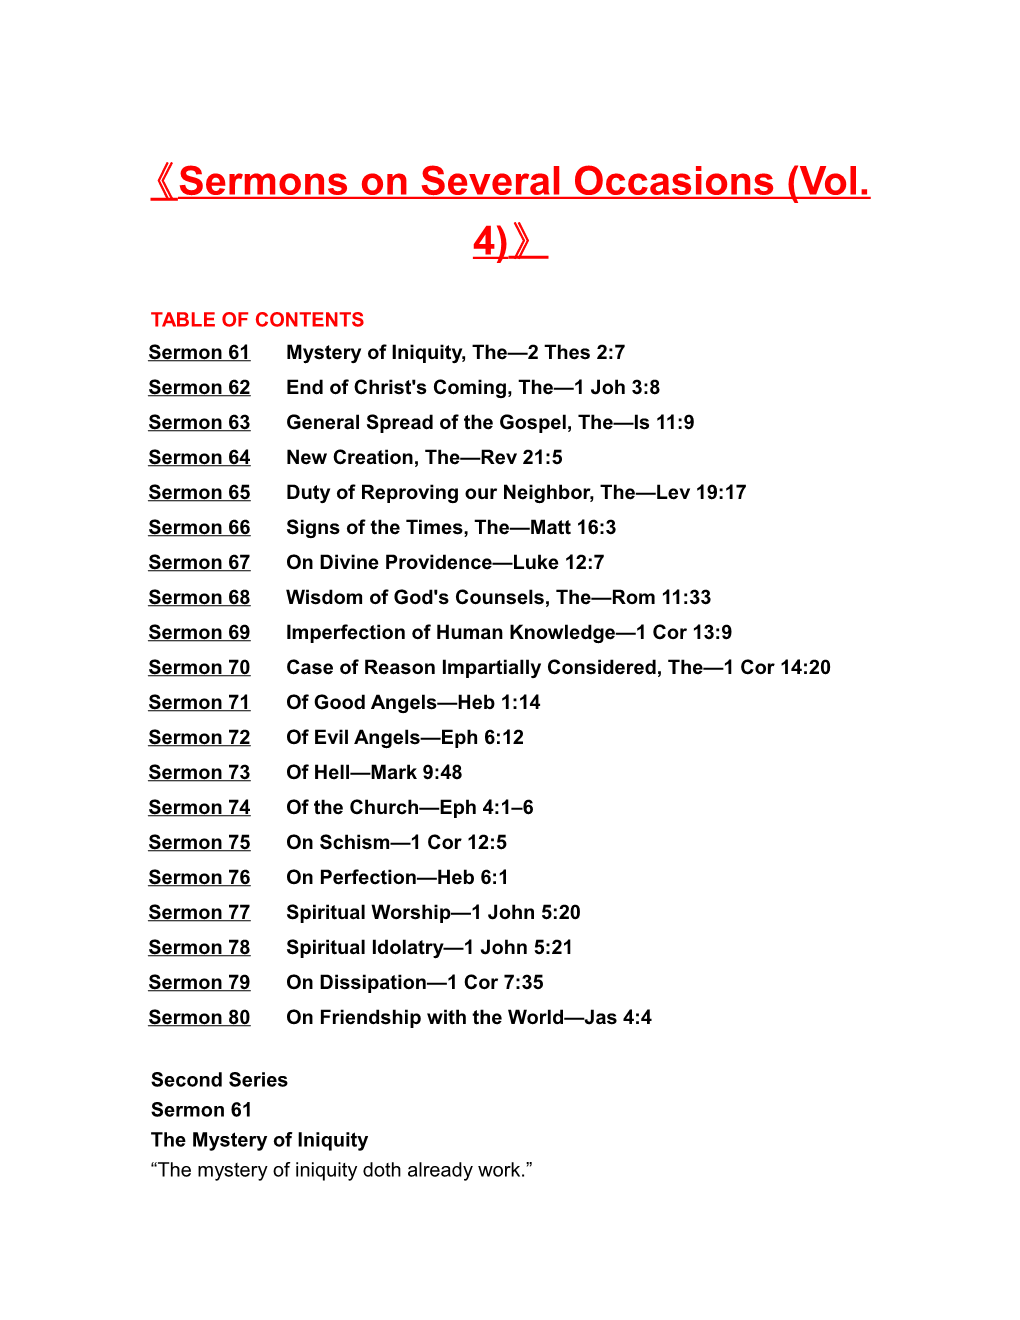 Sermons on Several Occasions (Vol. 4)